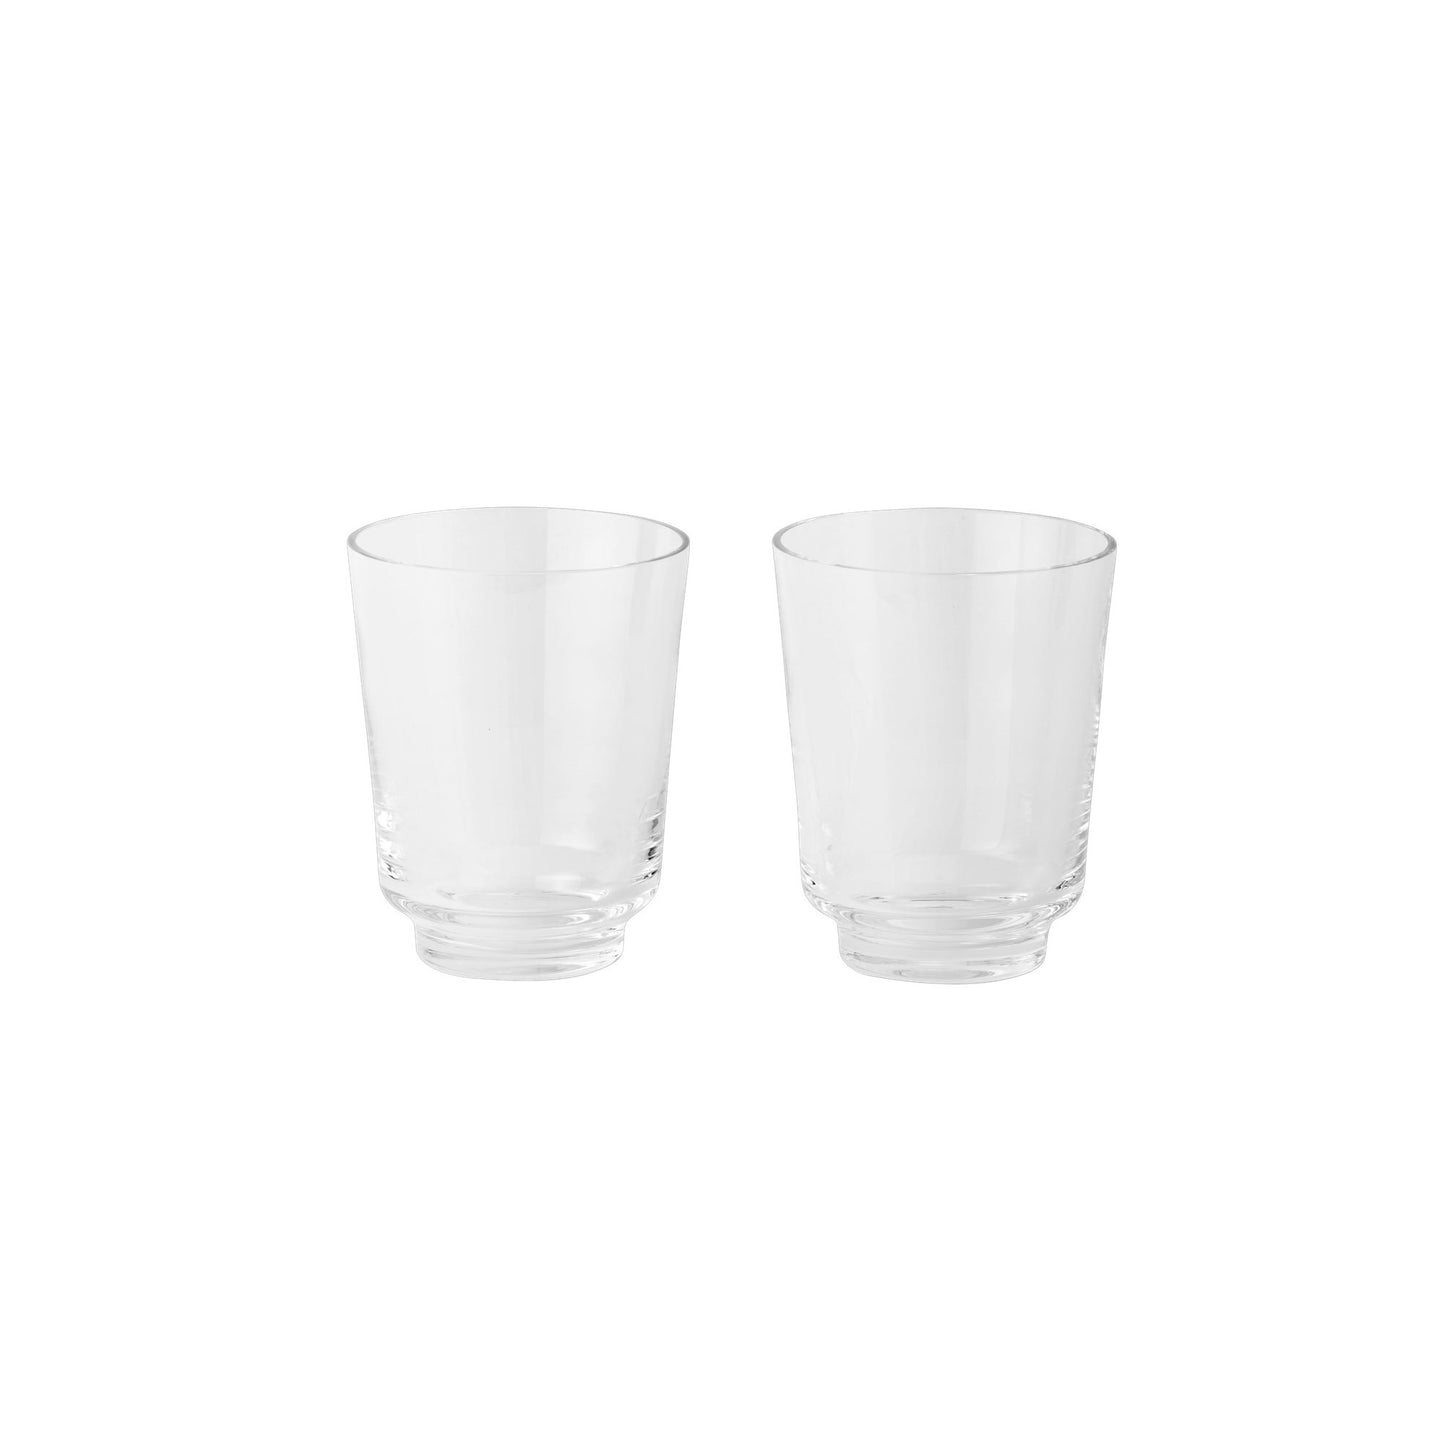 Raise Glass 30 Cl 2 Pcs by Muuto #Clear